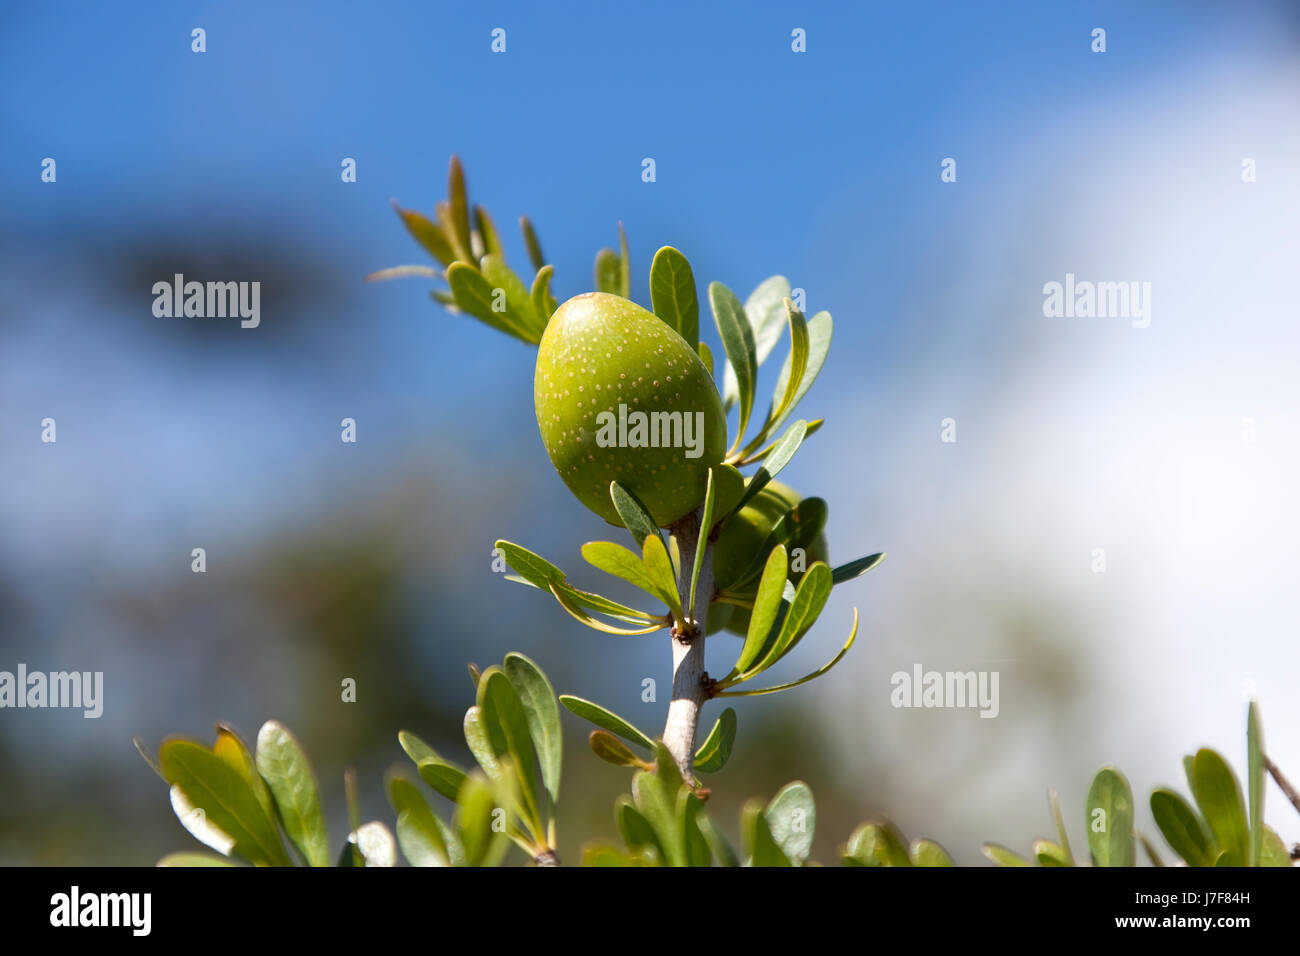 health tree branch nut organic healthy natural leaf closeup morocco daylight Stock Photo